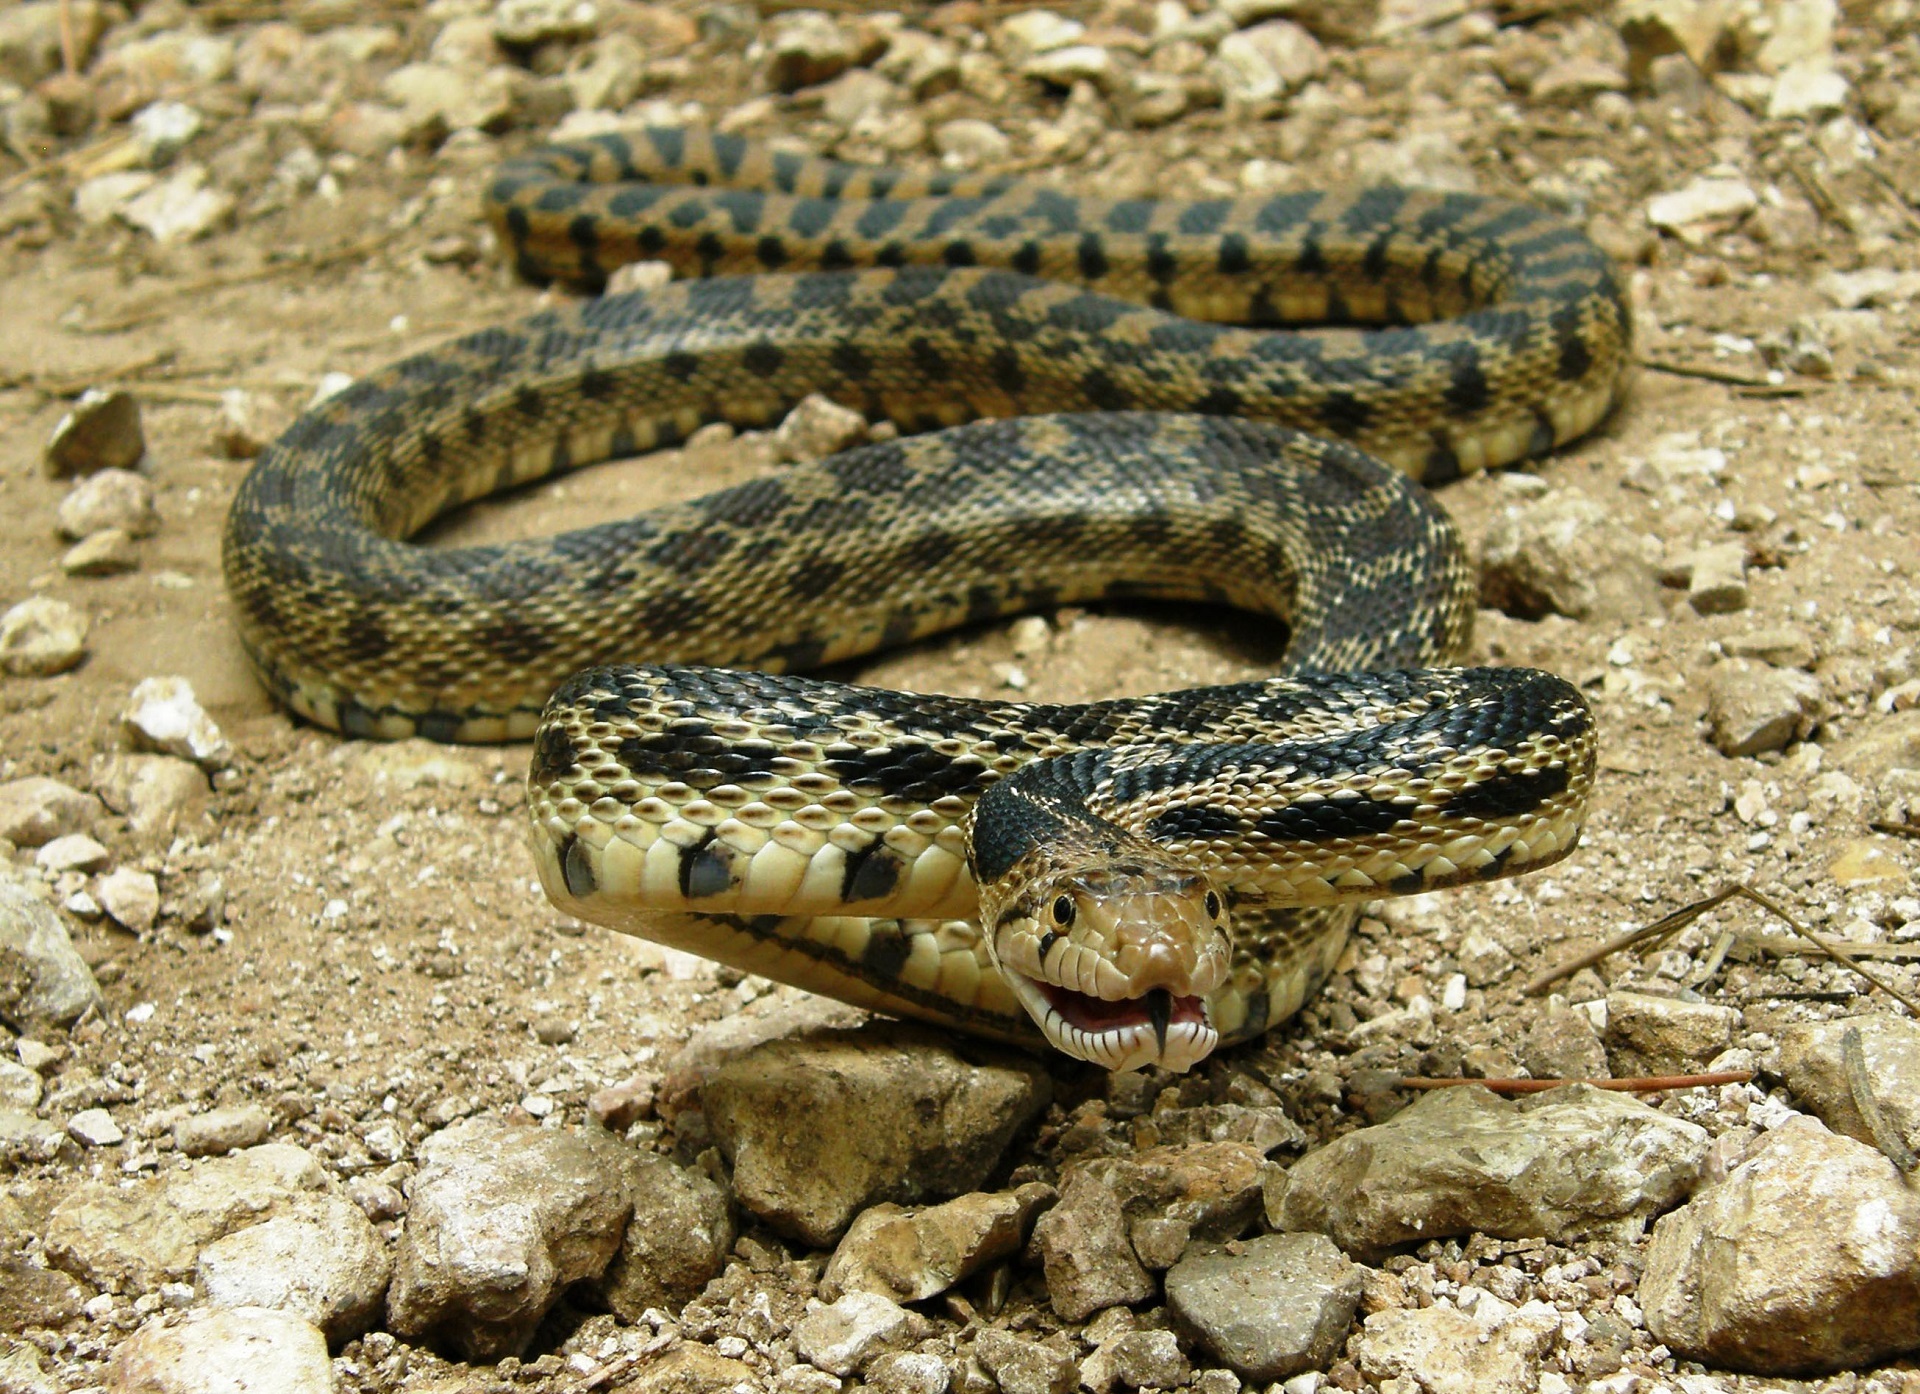 Pacific gopher snake by skeeze